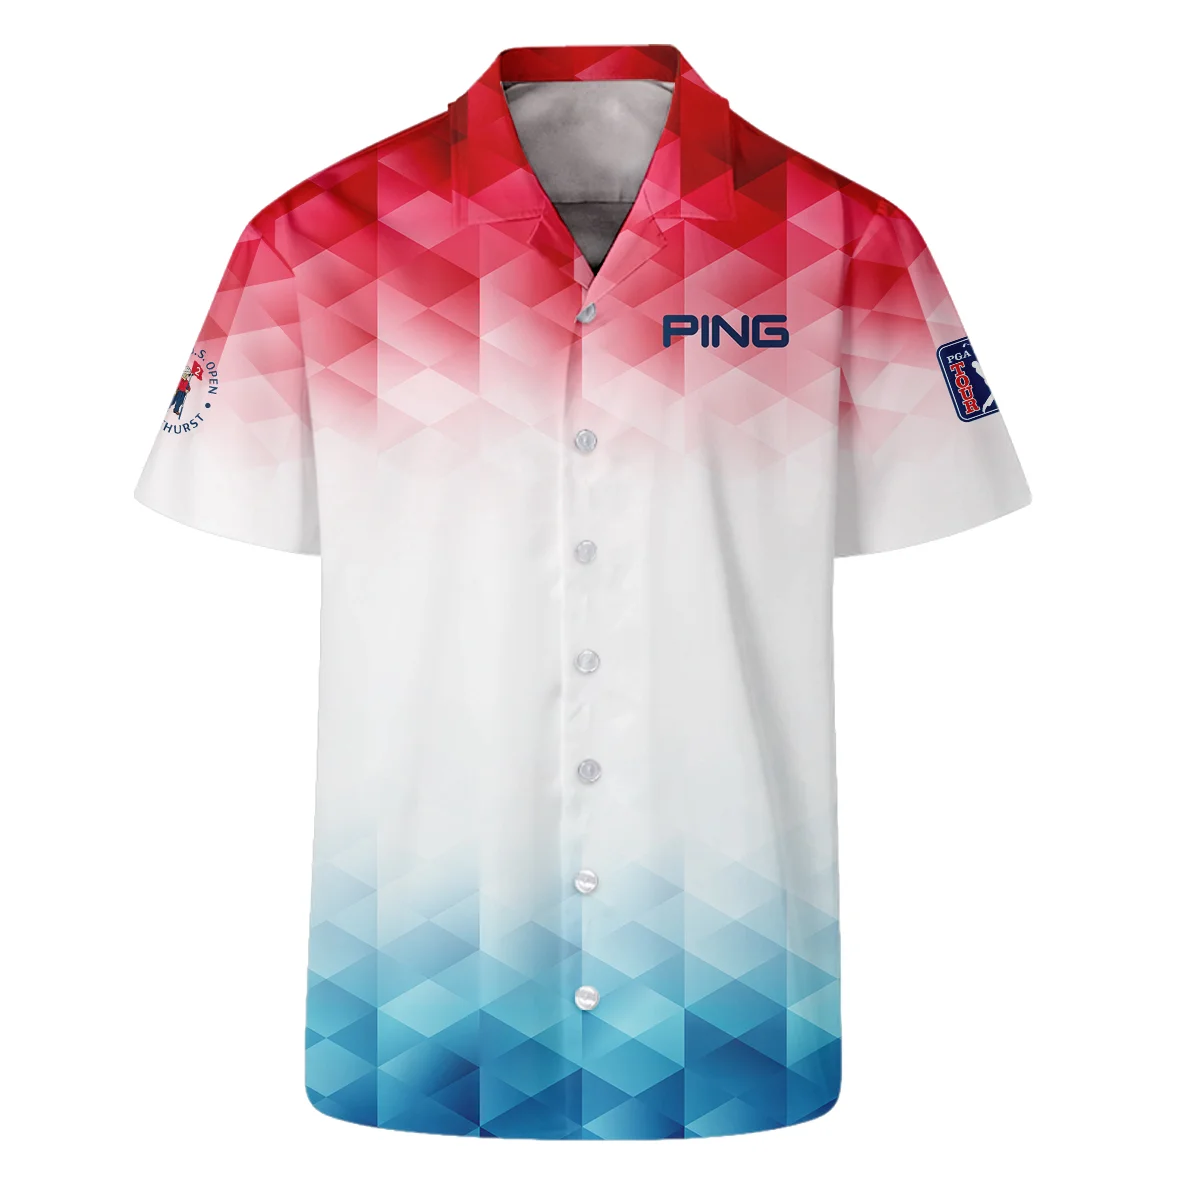 124th U.S. Open Pinehurst Ping Golf Sport Polo Shirt Blue Red Abstract Geometric Triangles All Over Print Polo Shirt For Men